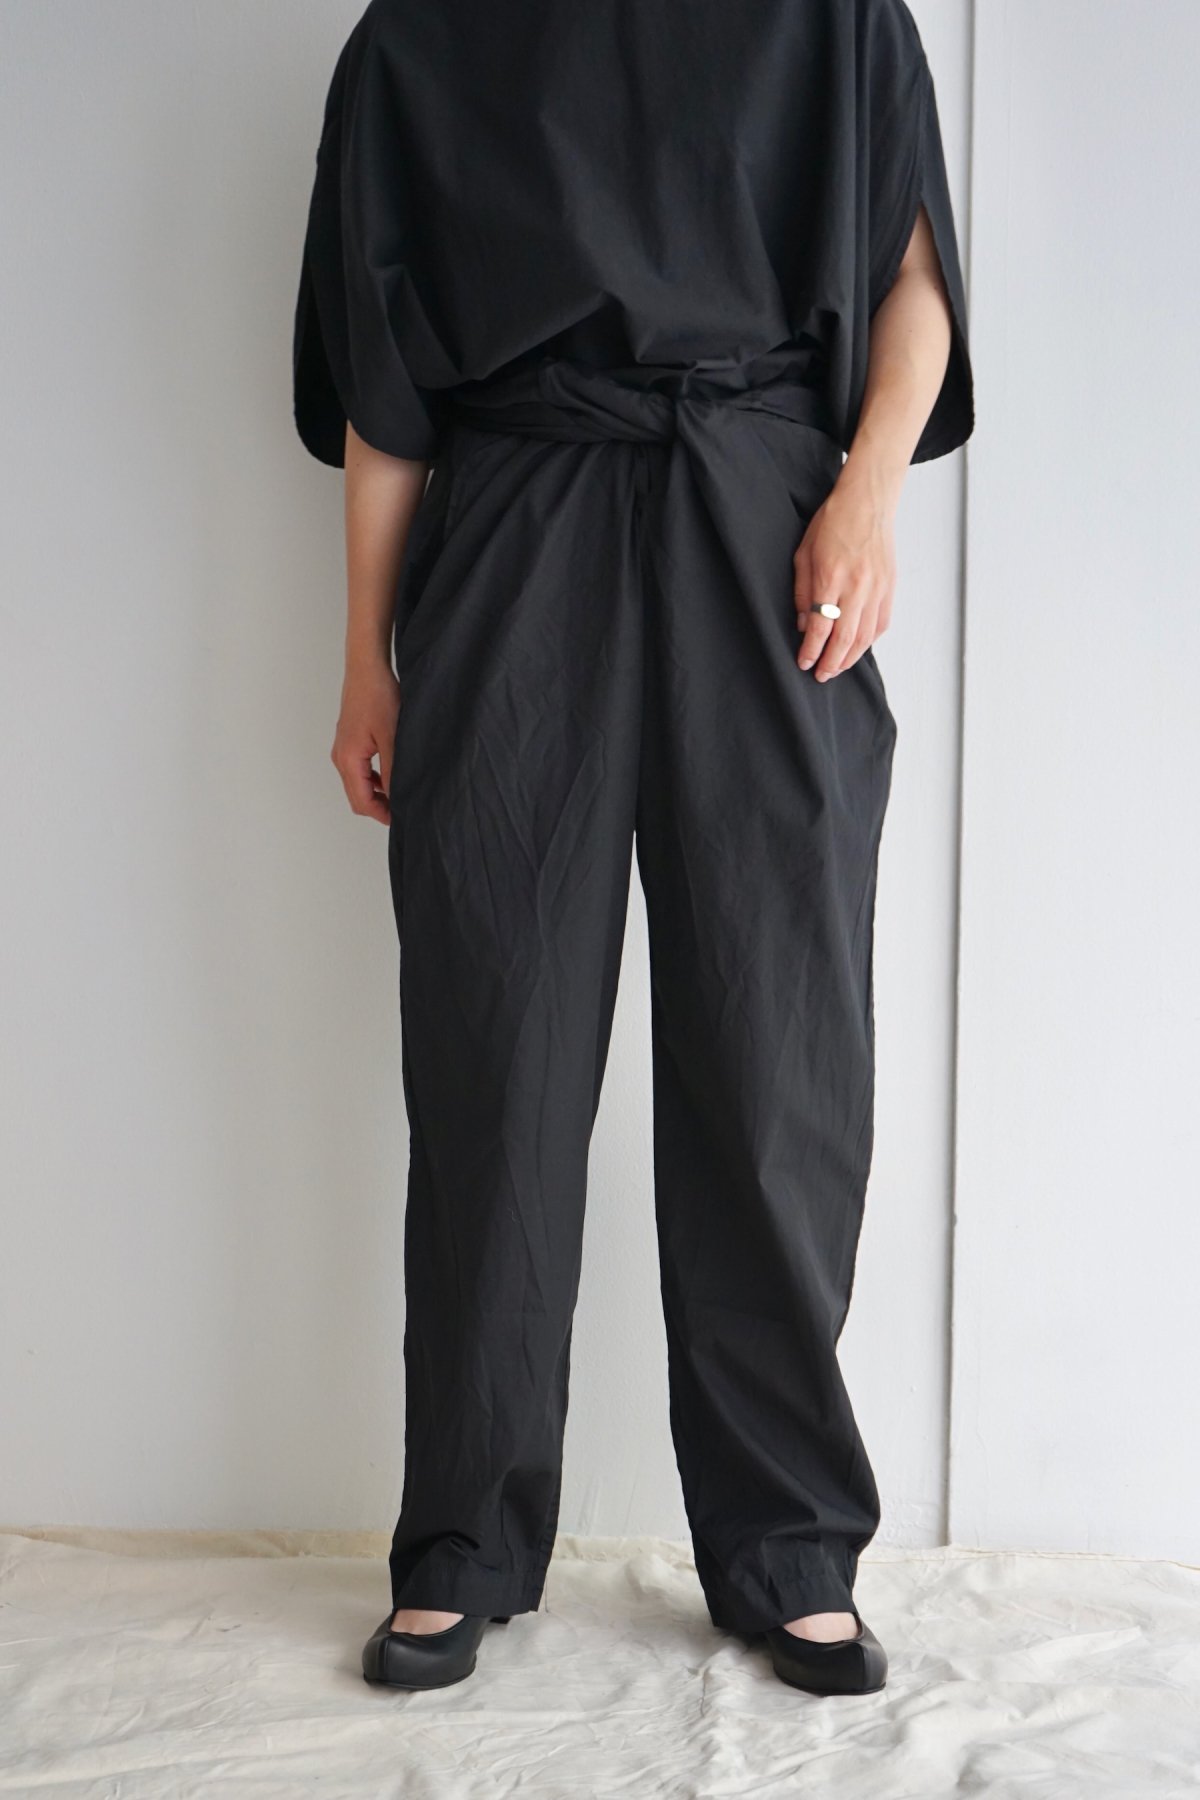 COSMIC WONDER / Suvin cotton broadcloth wrapped pants / BLACK